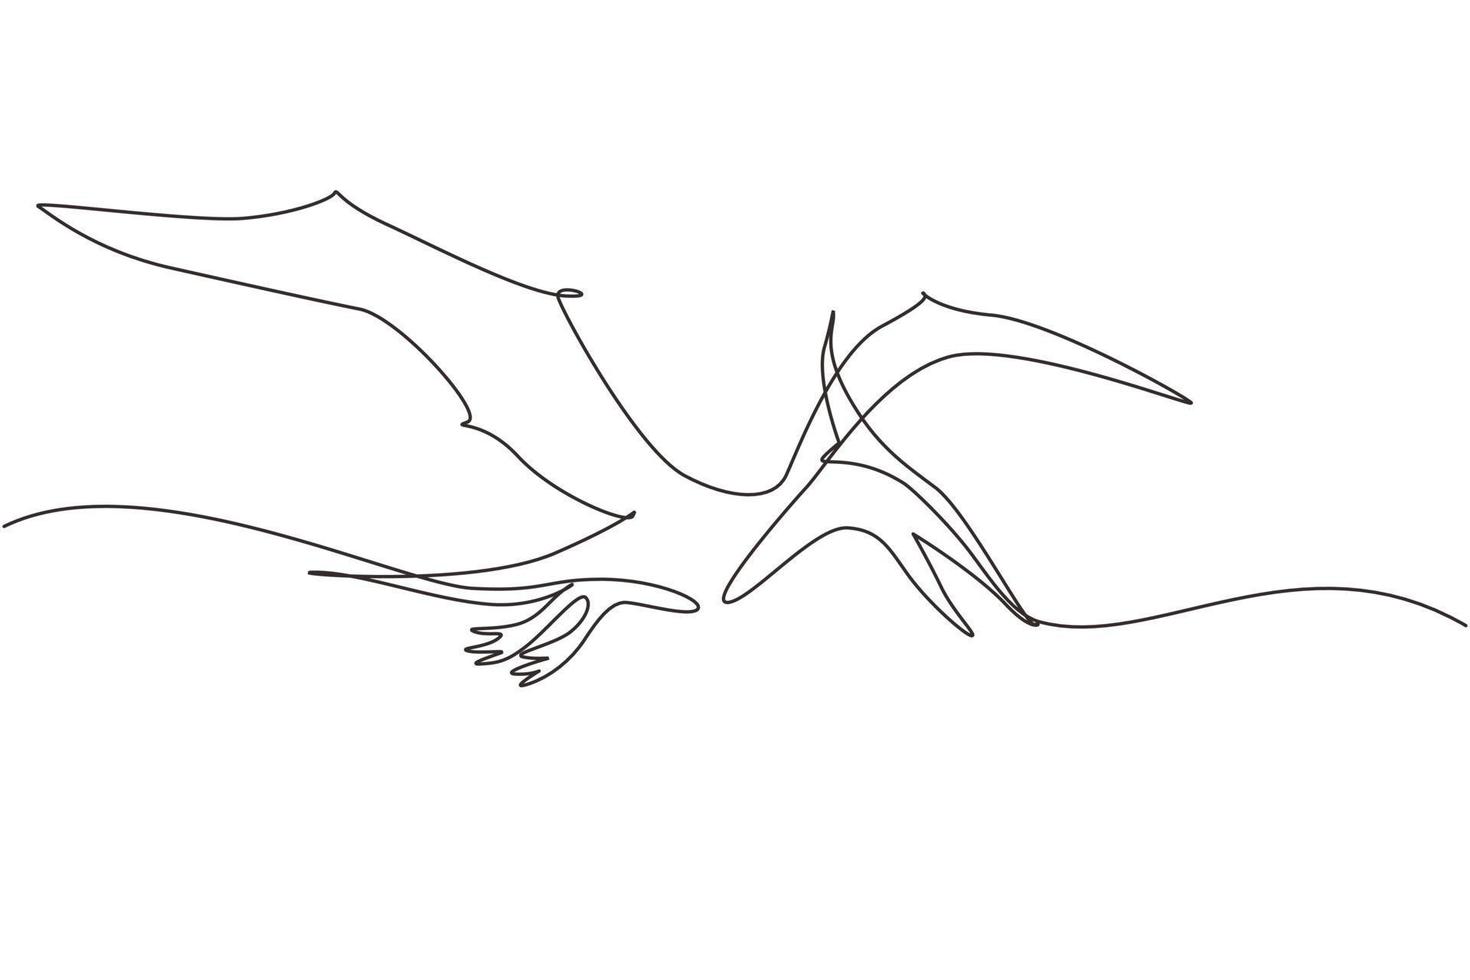 Continuous one line drawing flying pterodactyl dinosaur isolated on white background. Extinct ancient animals. Animal history for education. Single line draw design vector graphic illustration